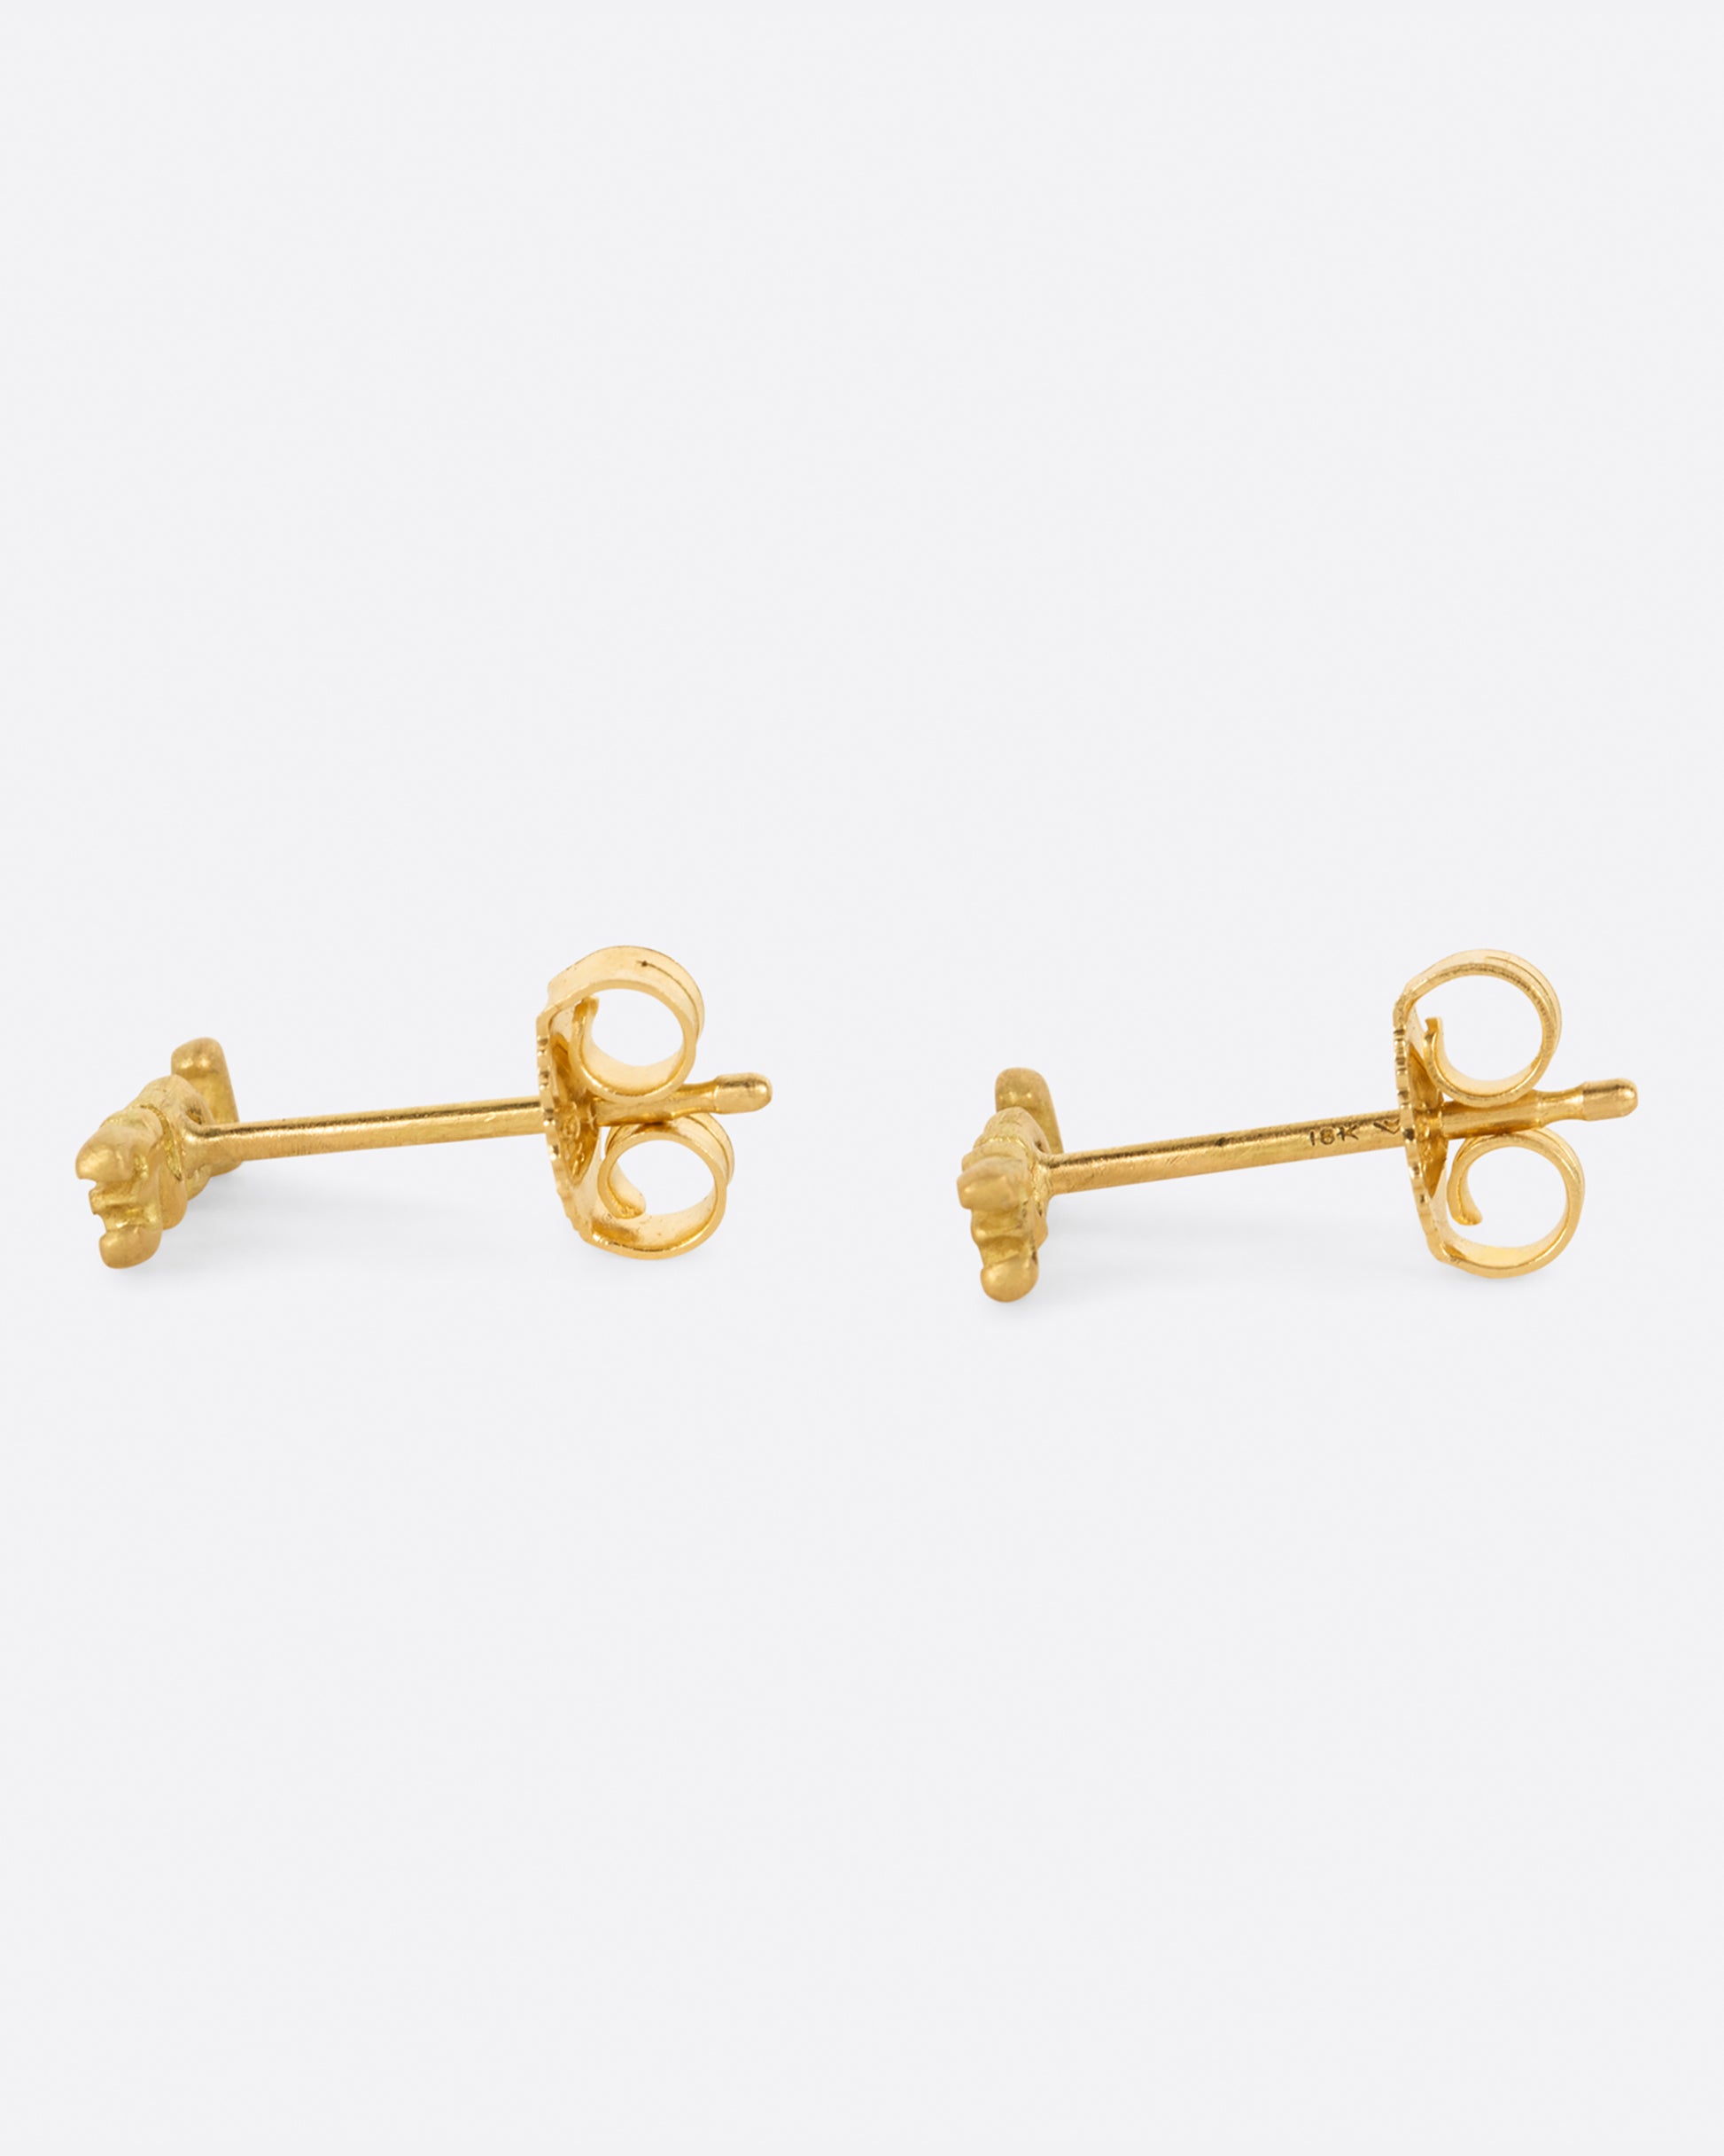 A pair of simple and sweet gold earrings. The word LOVE is spelt out, making these a great gift for your sweetheart.